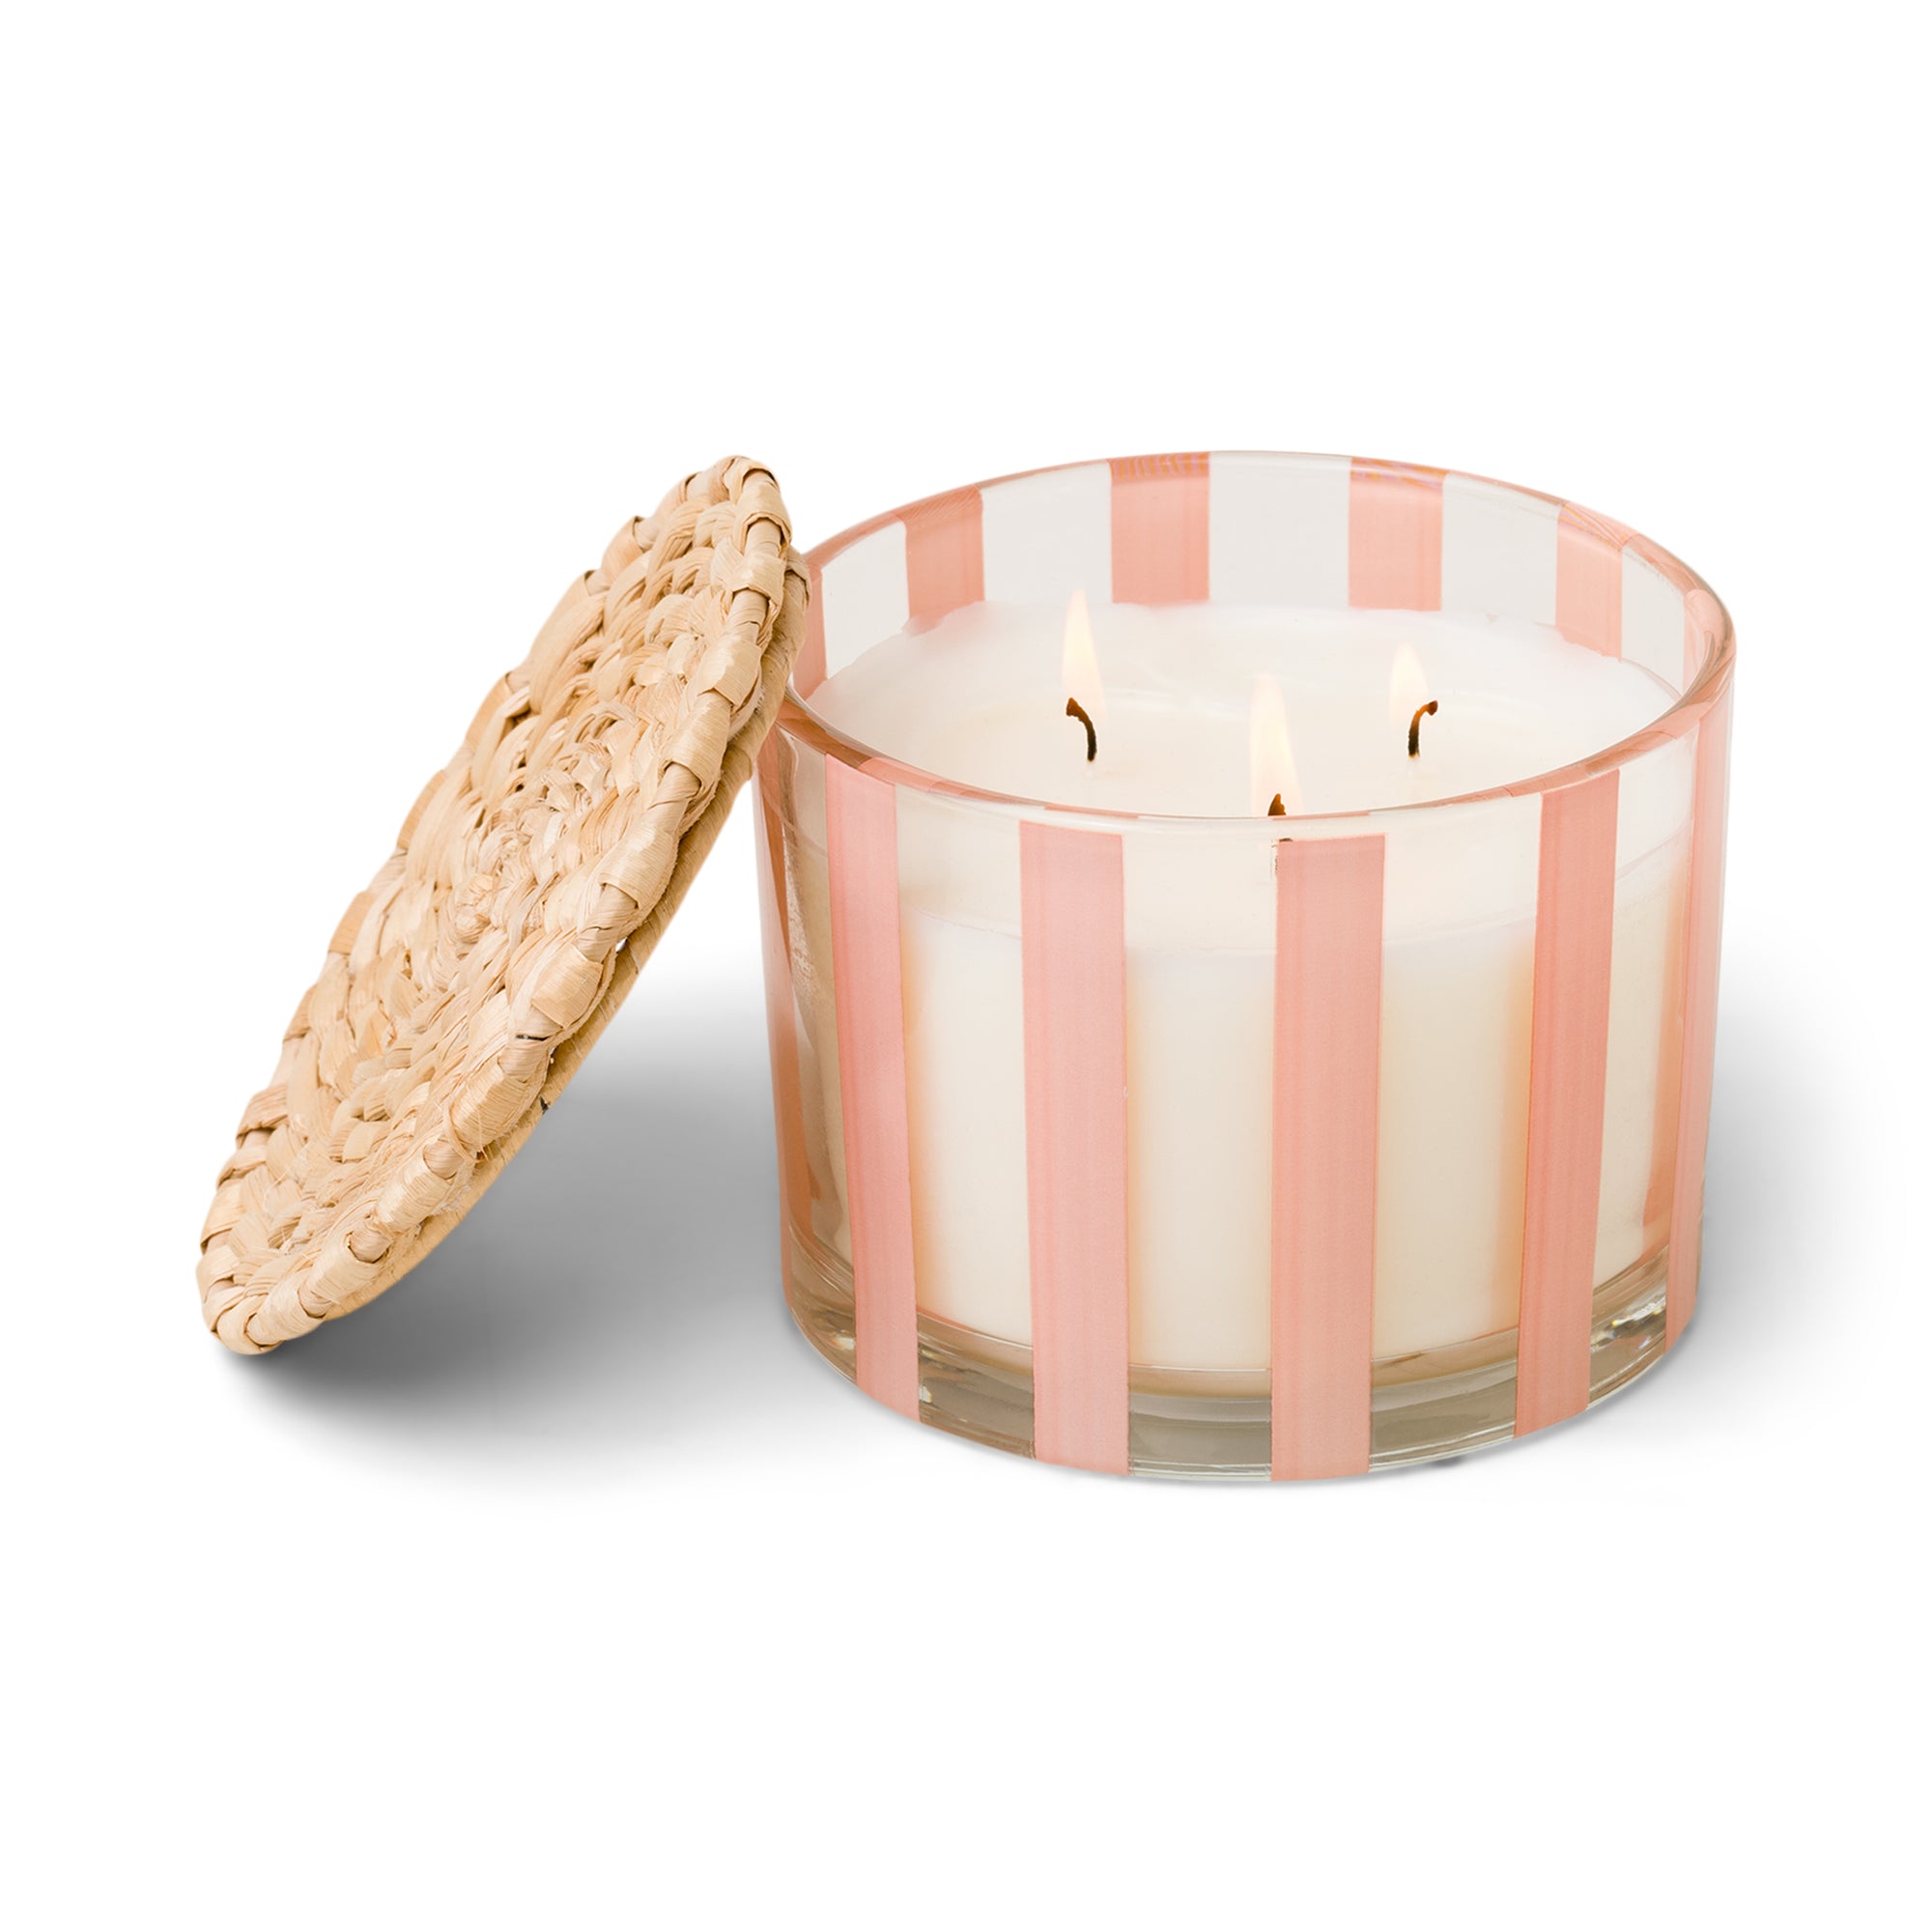 The Fresco Striped Glass Candle